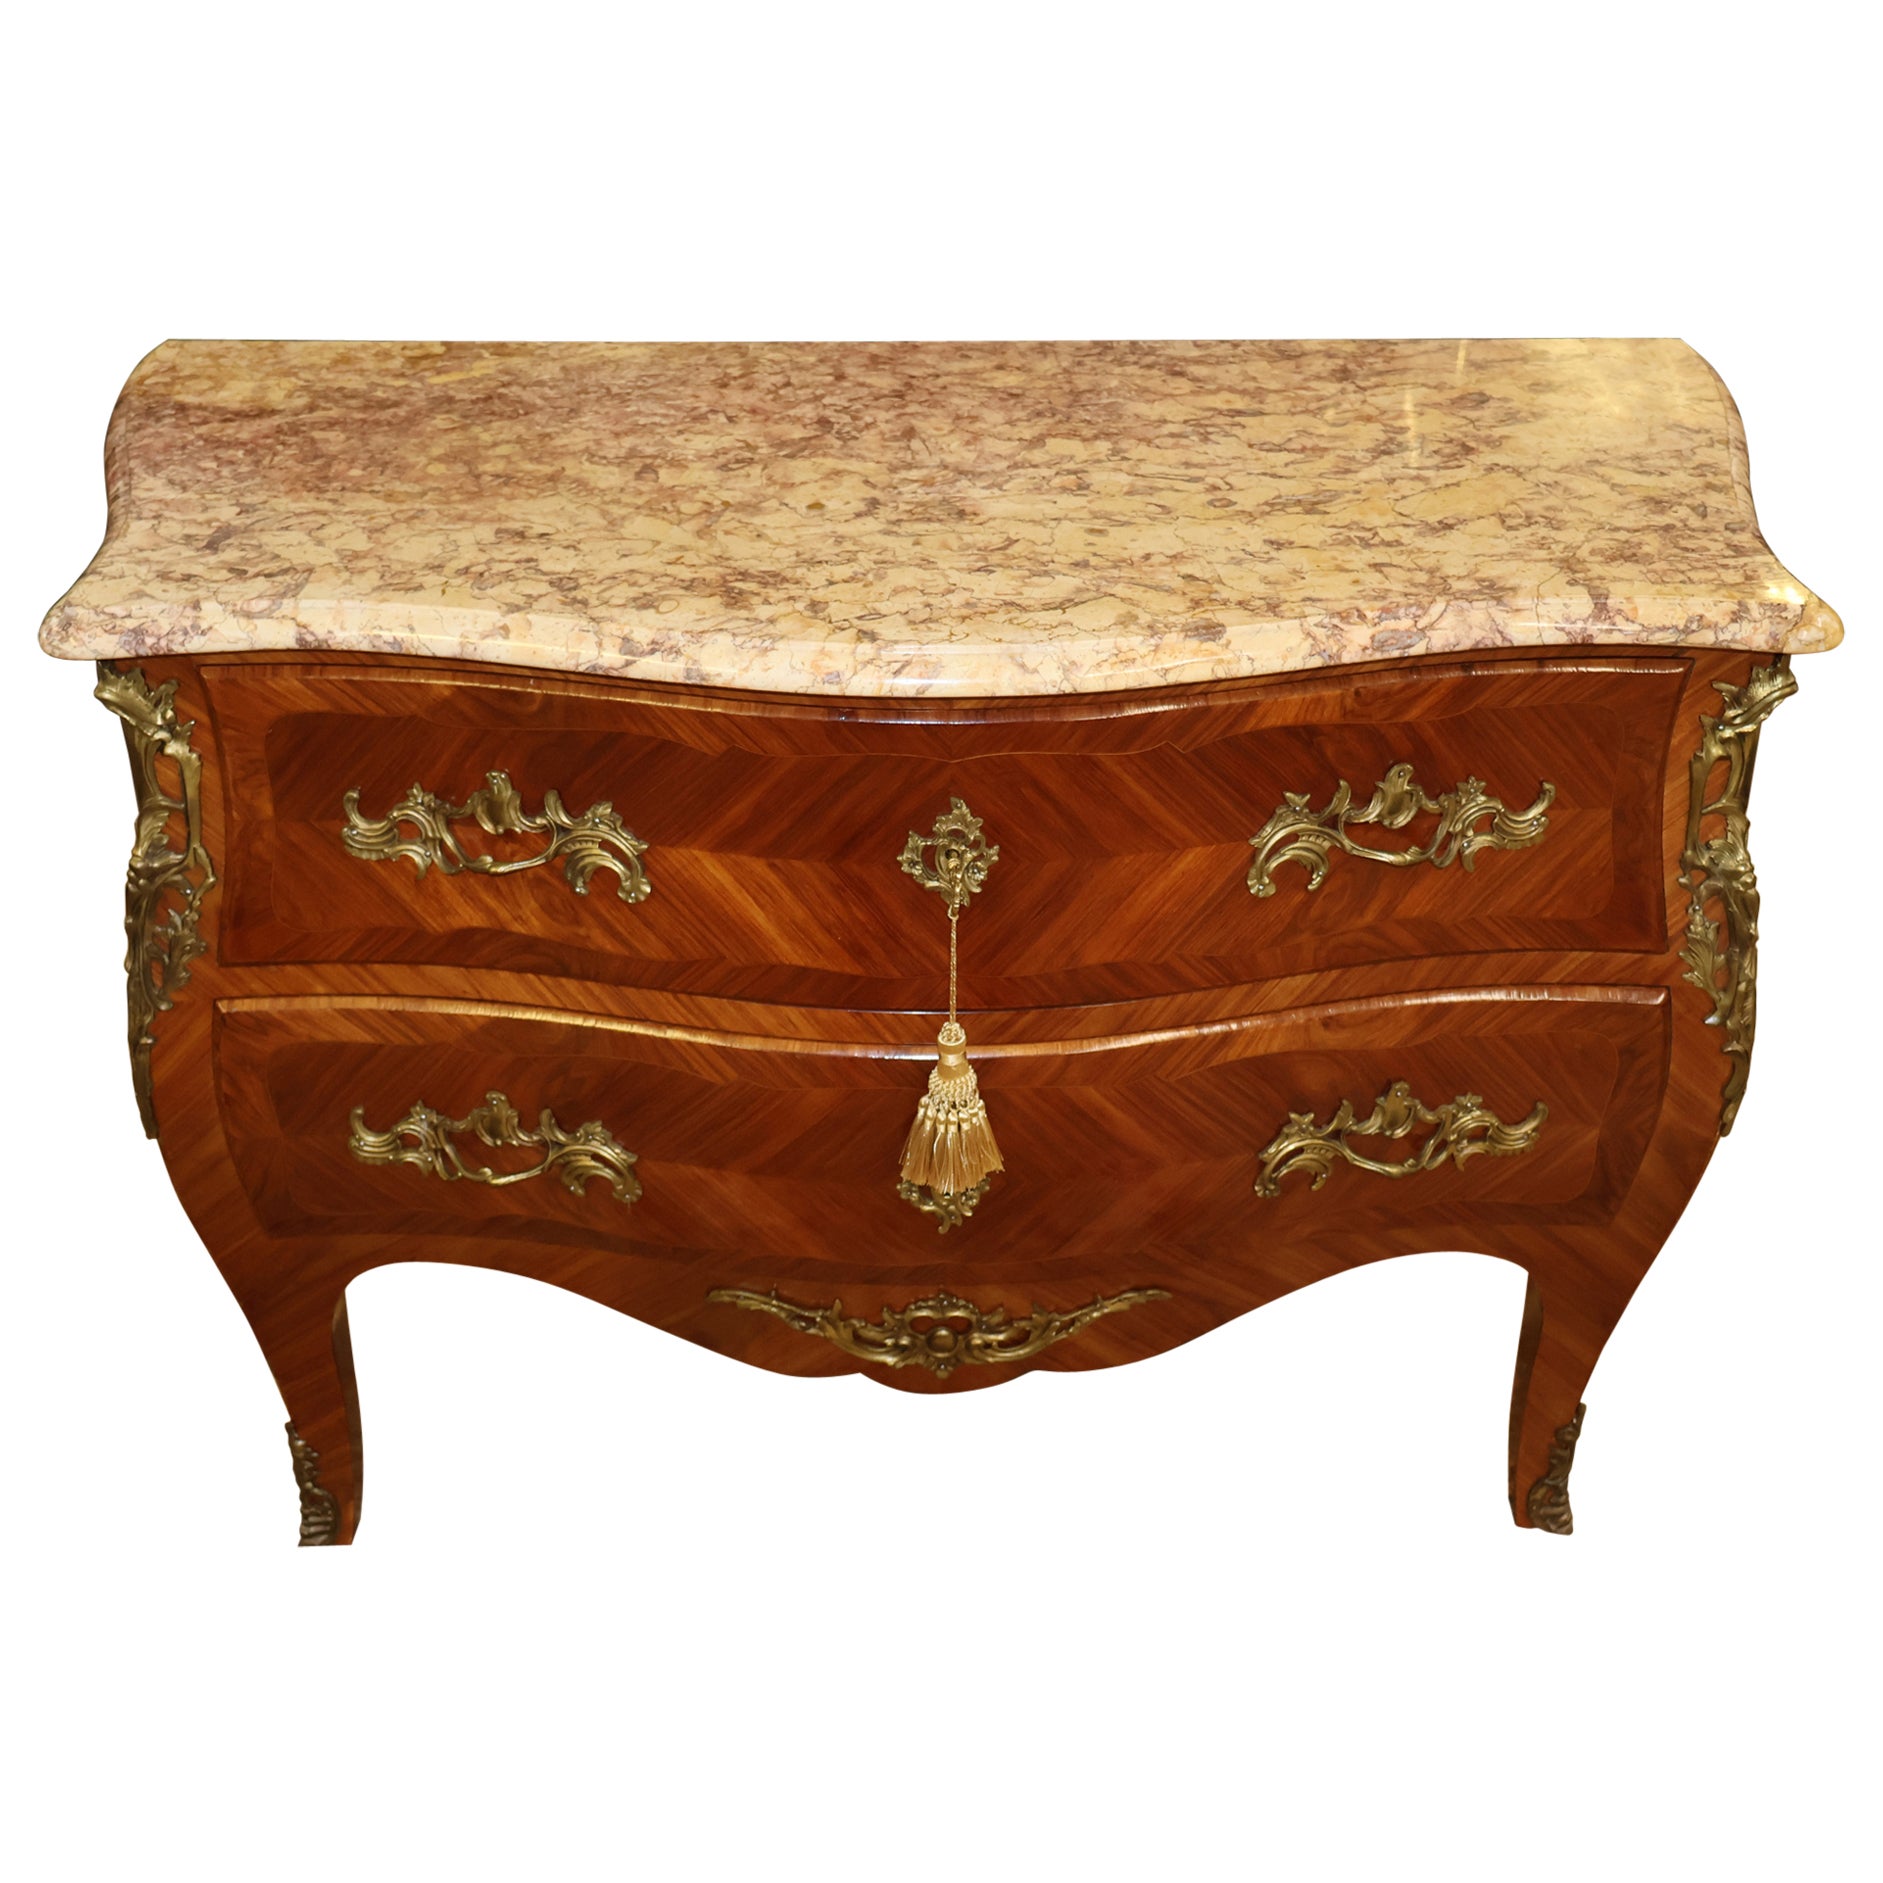 French Louis XV Style Kingwood Marble Top Commode Dresser Chest of Drawers